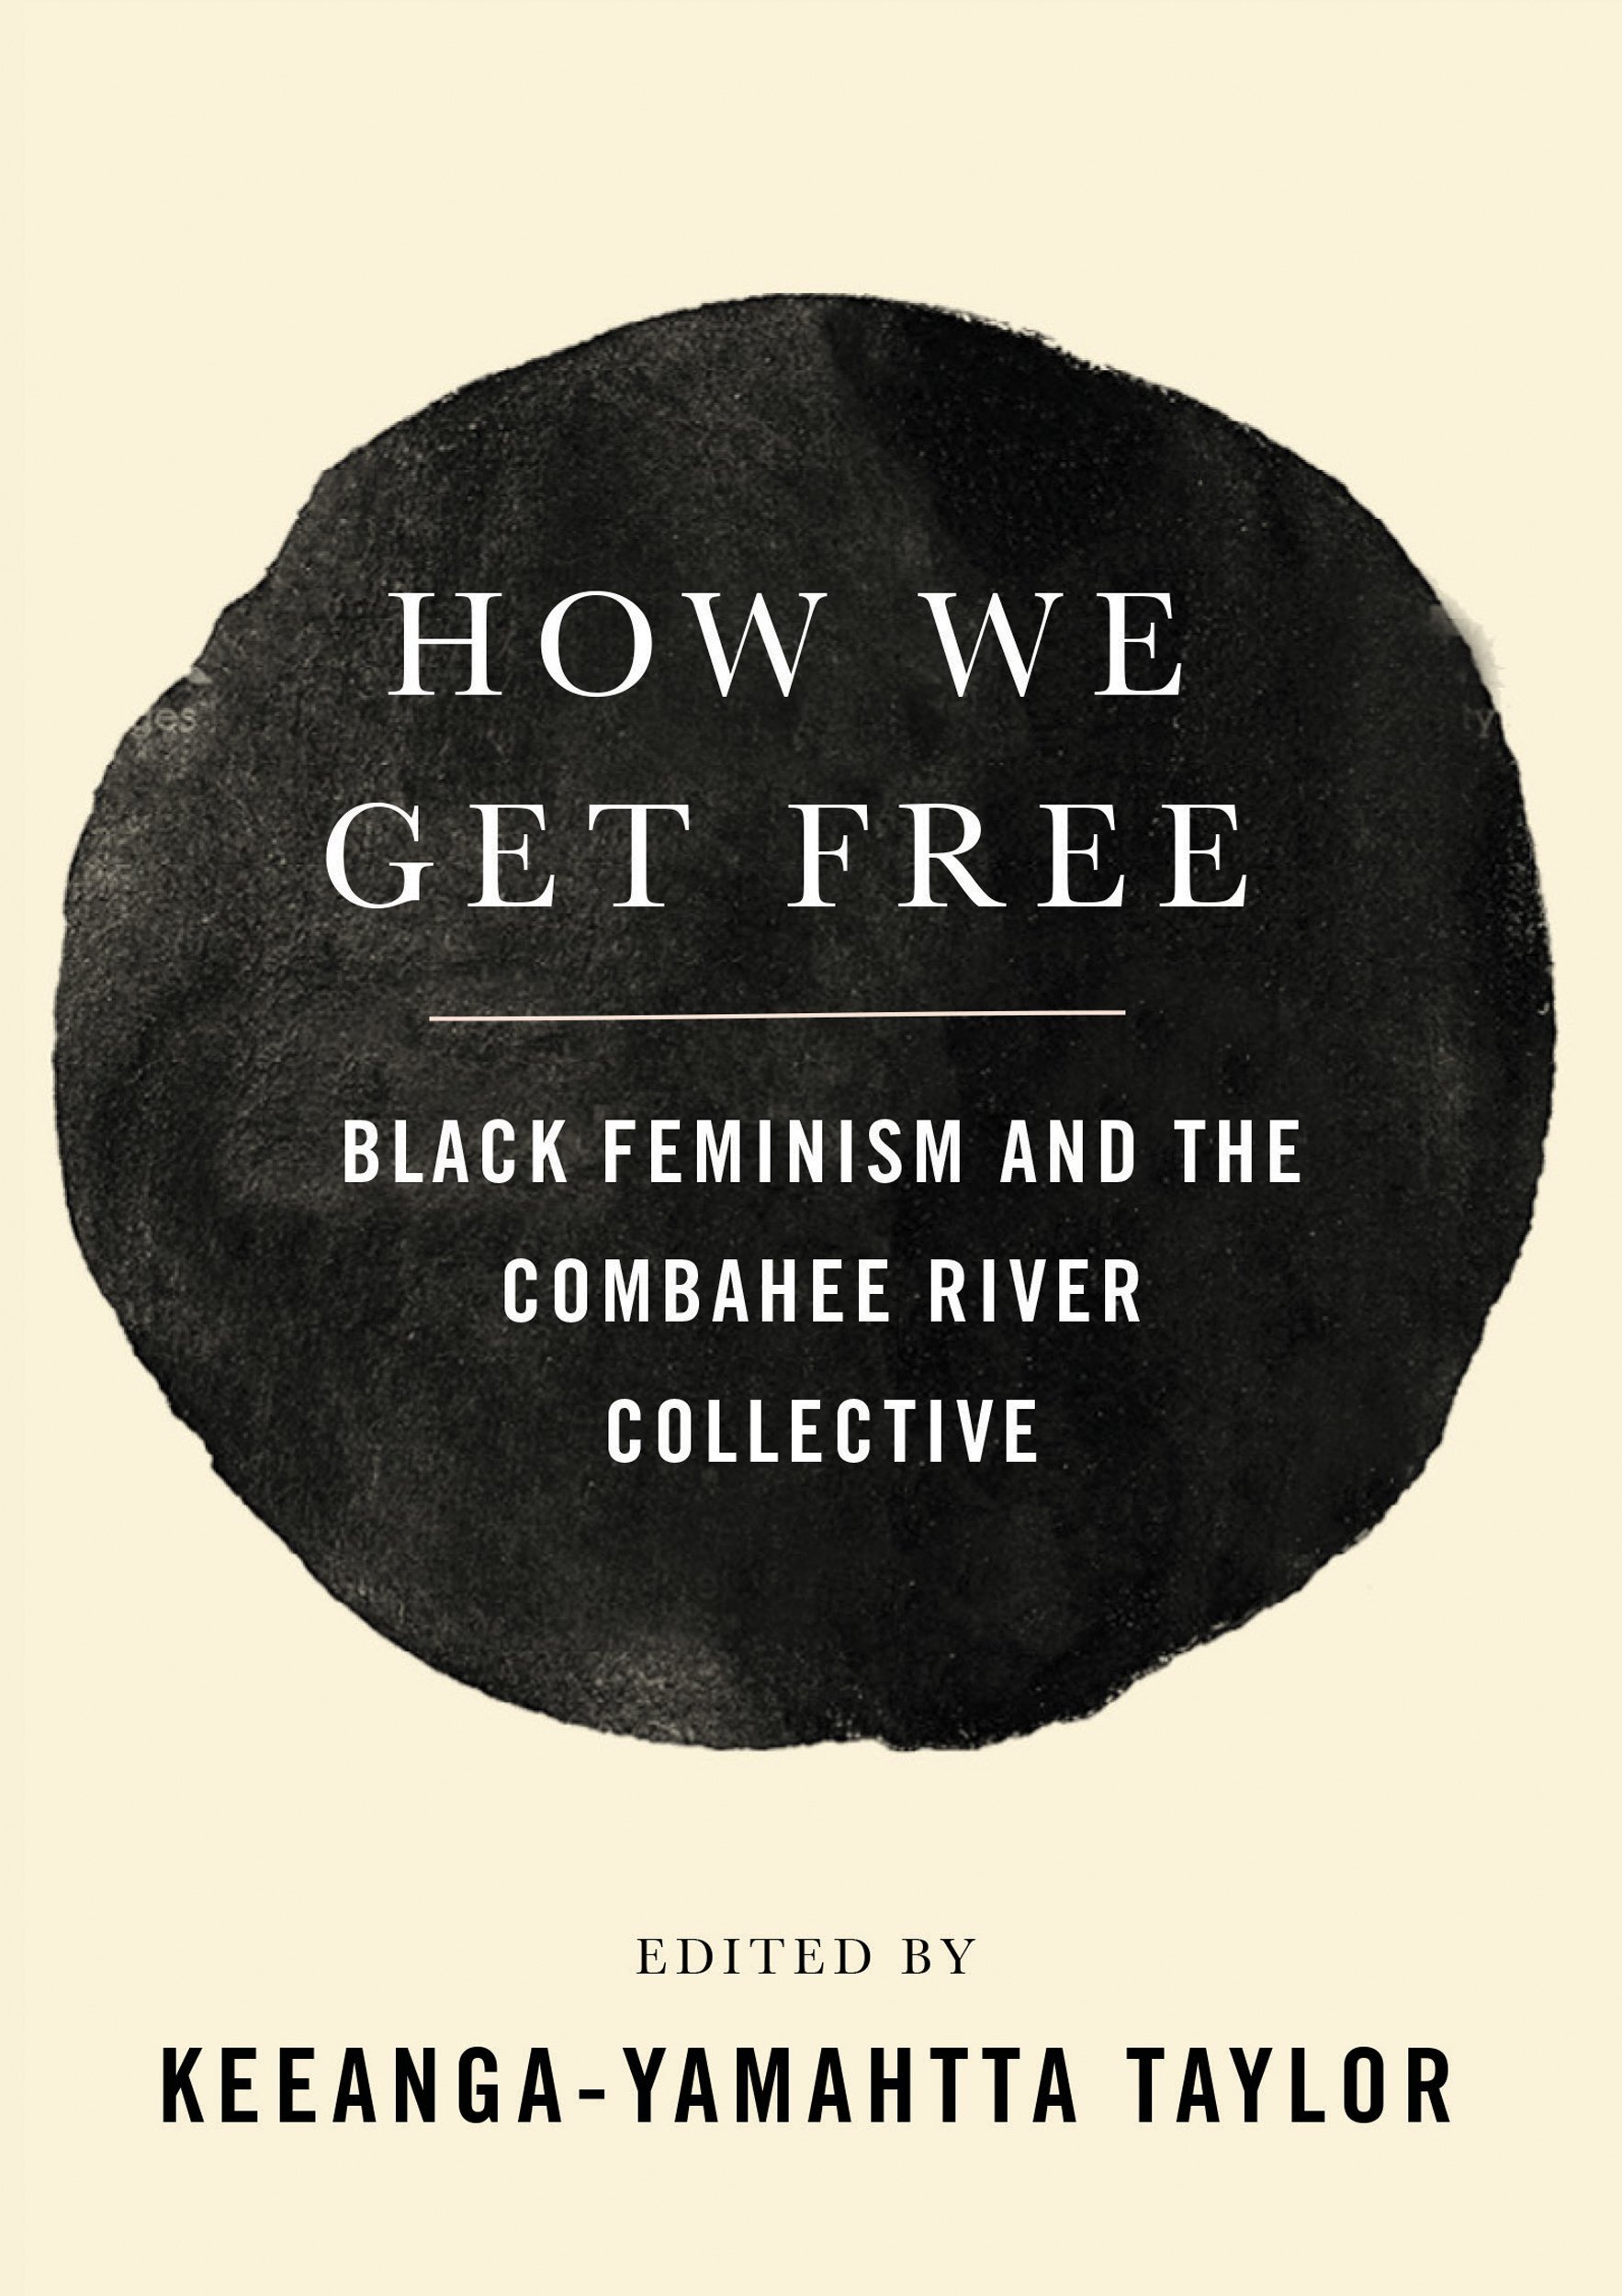 https://www.twentystoriesla.com/antiracist-reading/how-we-get-free-black-feminism-and-the-combahee-river-collective-edited-by-keeanga-yamahtta-taylor